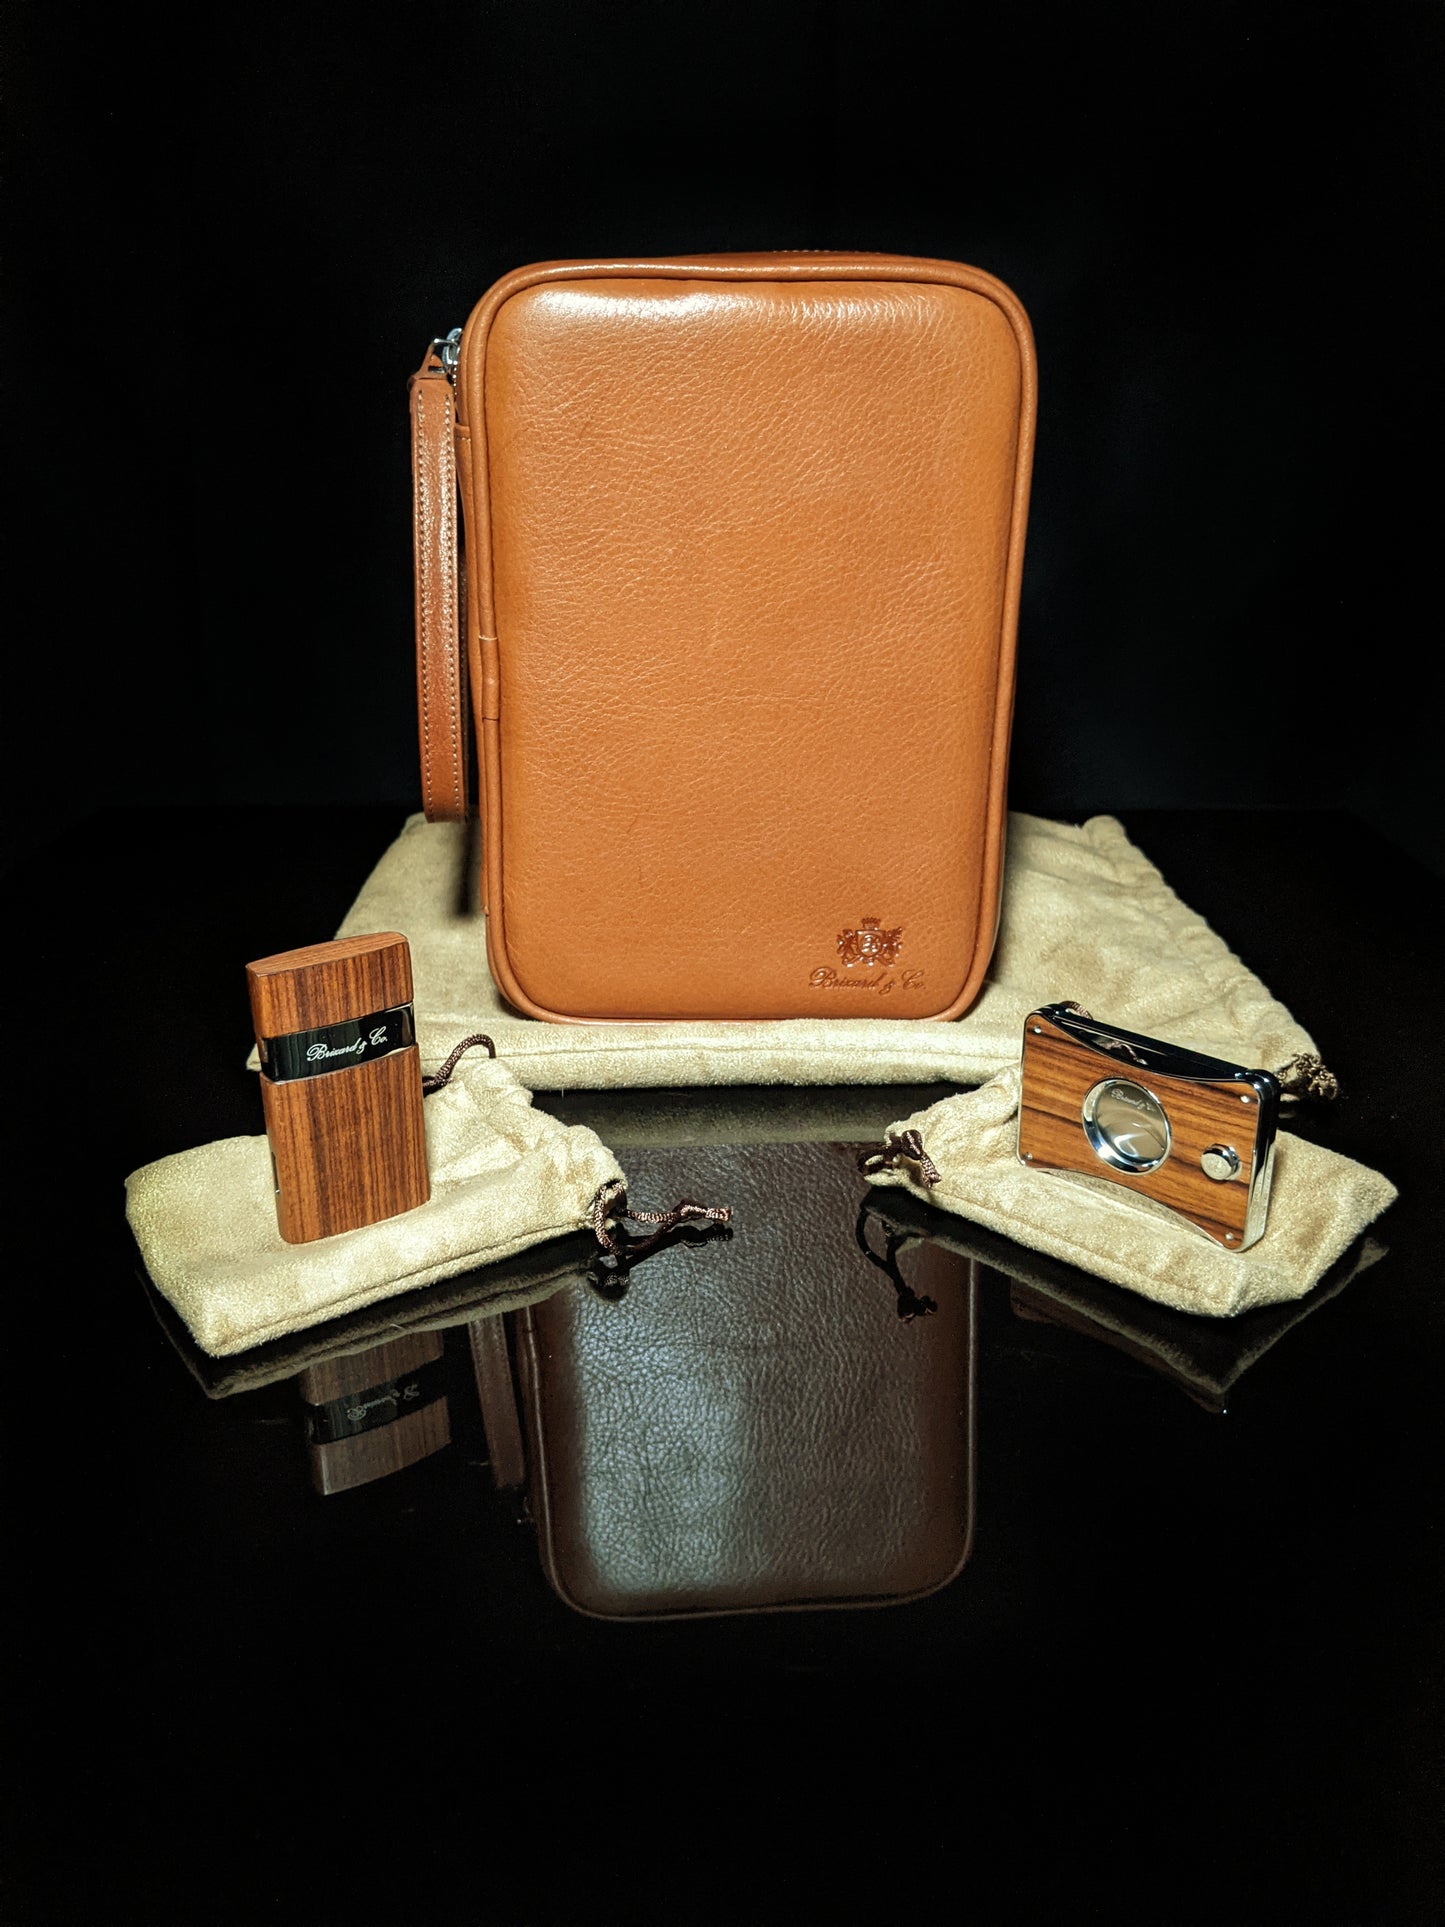 Brizard and Co Havana Traveler in Tan Leather with matching cutter and lighter NIB